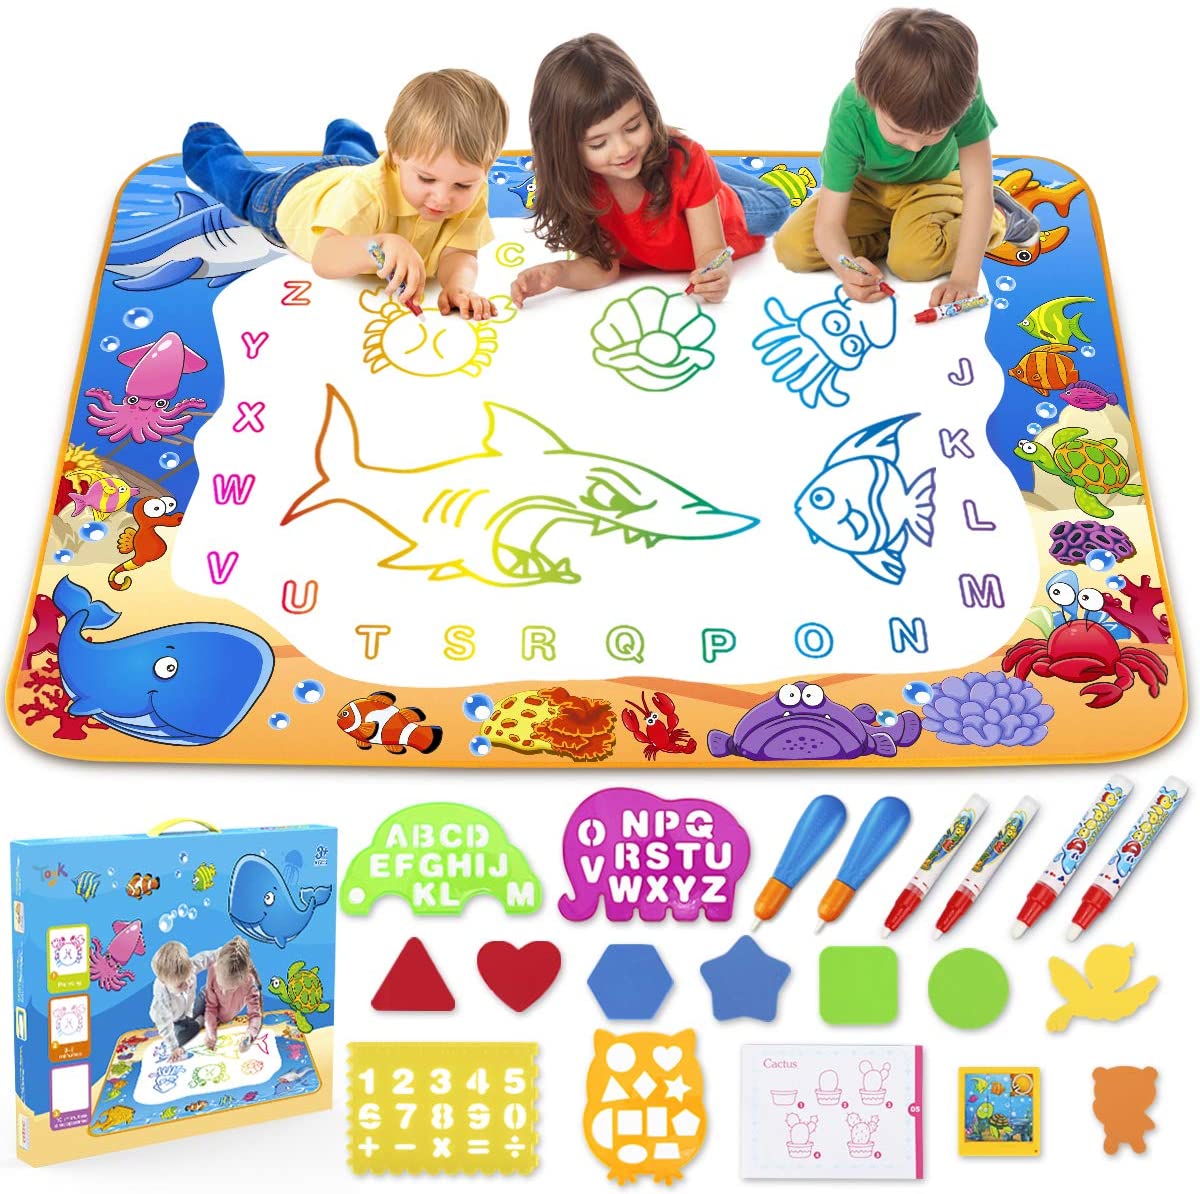 Review of Toyk Aqua Magic Mat - Kids Painting Writing Doodle Board Toy